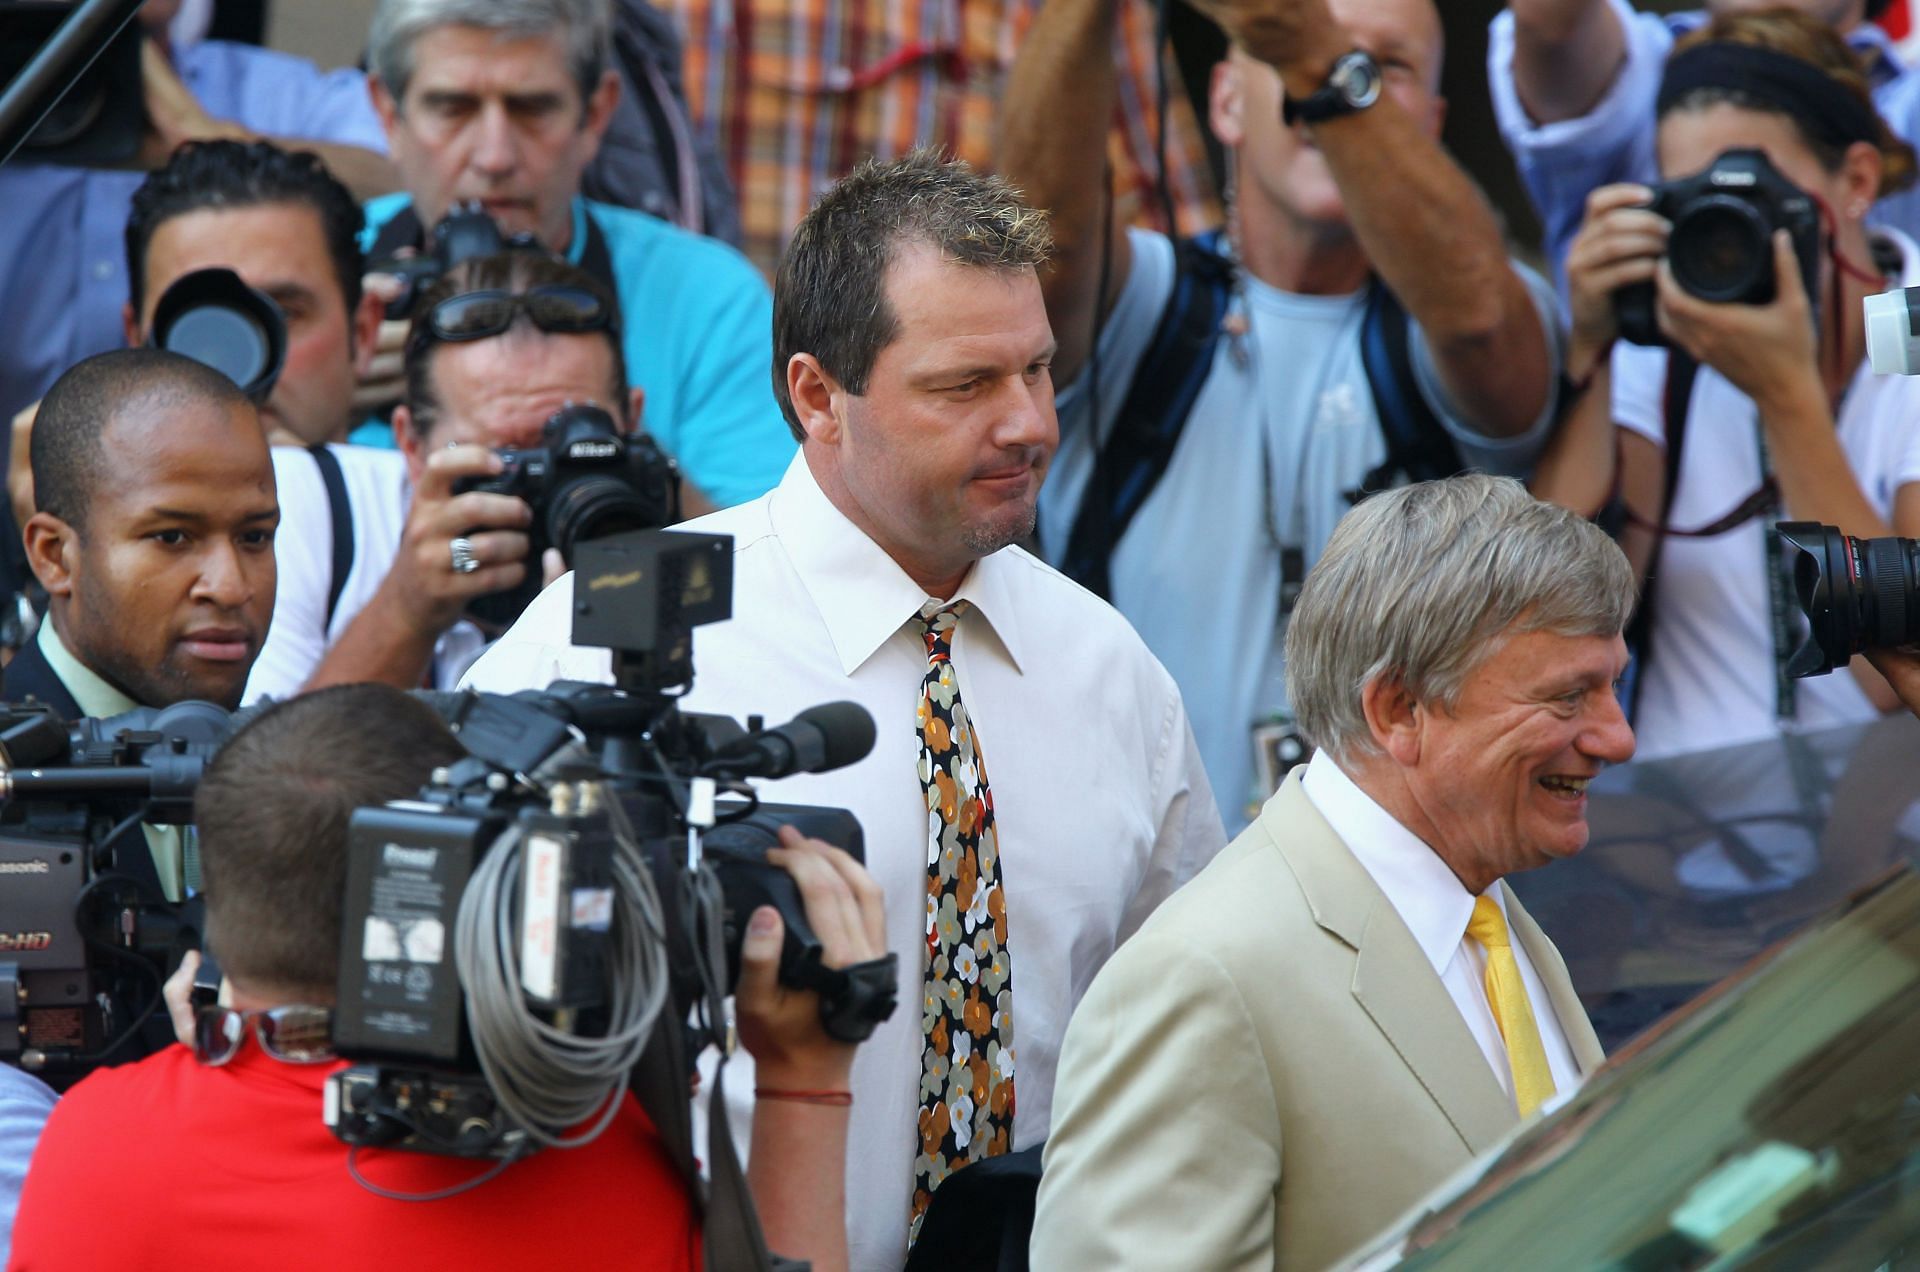 Baseball pitching star Roger Clemens walks out of the U.S. District Court after his arraignment, on August 30, 2010 in Washington, DC.